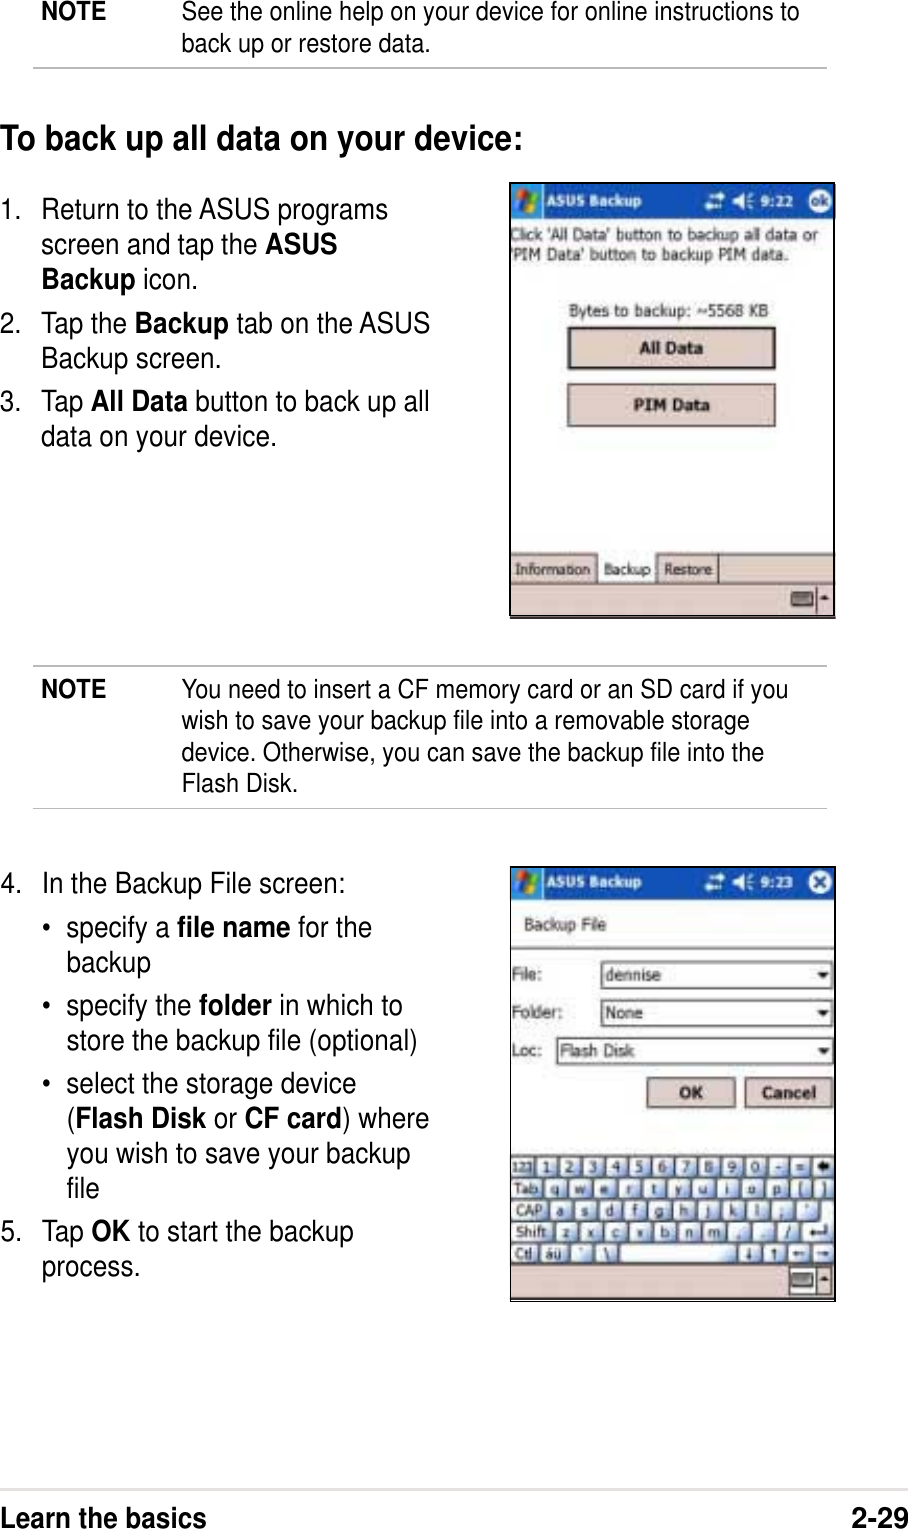 Learn the basics2-291. Return to the ASUS programsscreen and tap the ASUSBackup icon.2. Tap the Backup tab on the ASUSBackup screen.3. Tap All Data button to back up alldata on your device.To back up all data on your device:4. In the Backup File screen:• specify a file name for thebackup• specify the folder in which tostore the backup file (optional)• select the storage device(Flash Disk or CF card) whereyou wish to save your backupfile5. Tap OK to start the backupprocess.NOTE You need to insert a CF memory card or an SD card if youwish to save your backup file into a removable storagedevice. Otherwise, you can save the backup file into theFlash Disk.NOTE See the online help on your device for online instructions toback up or restore data.